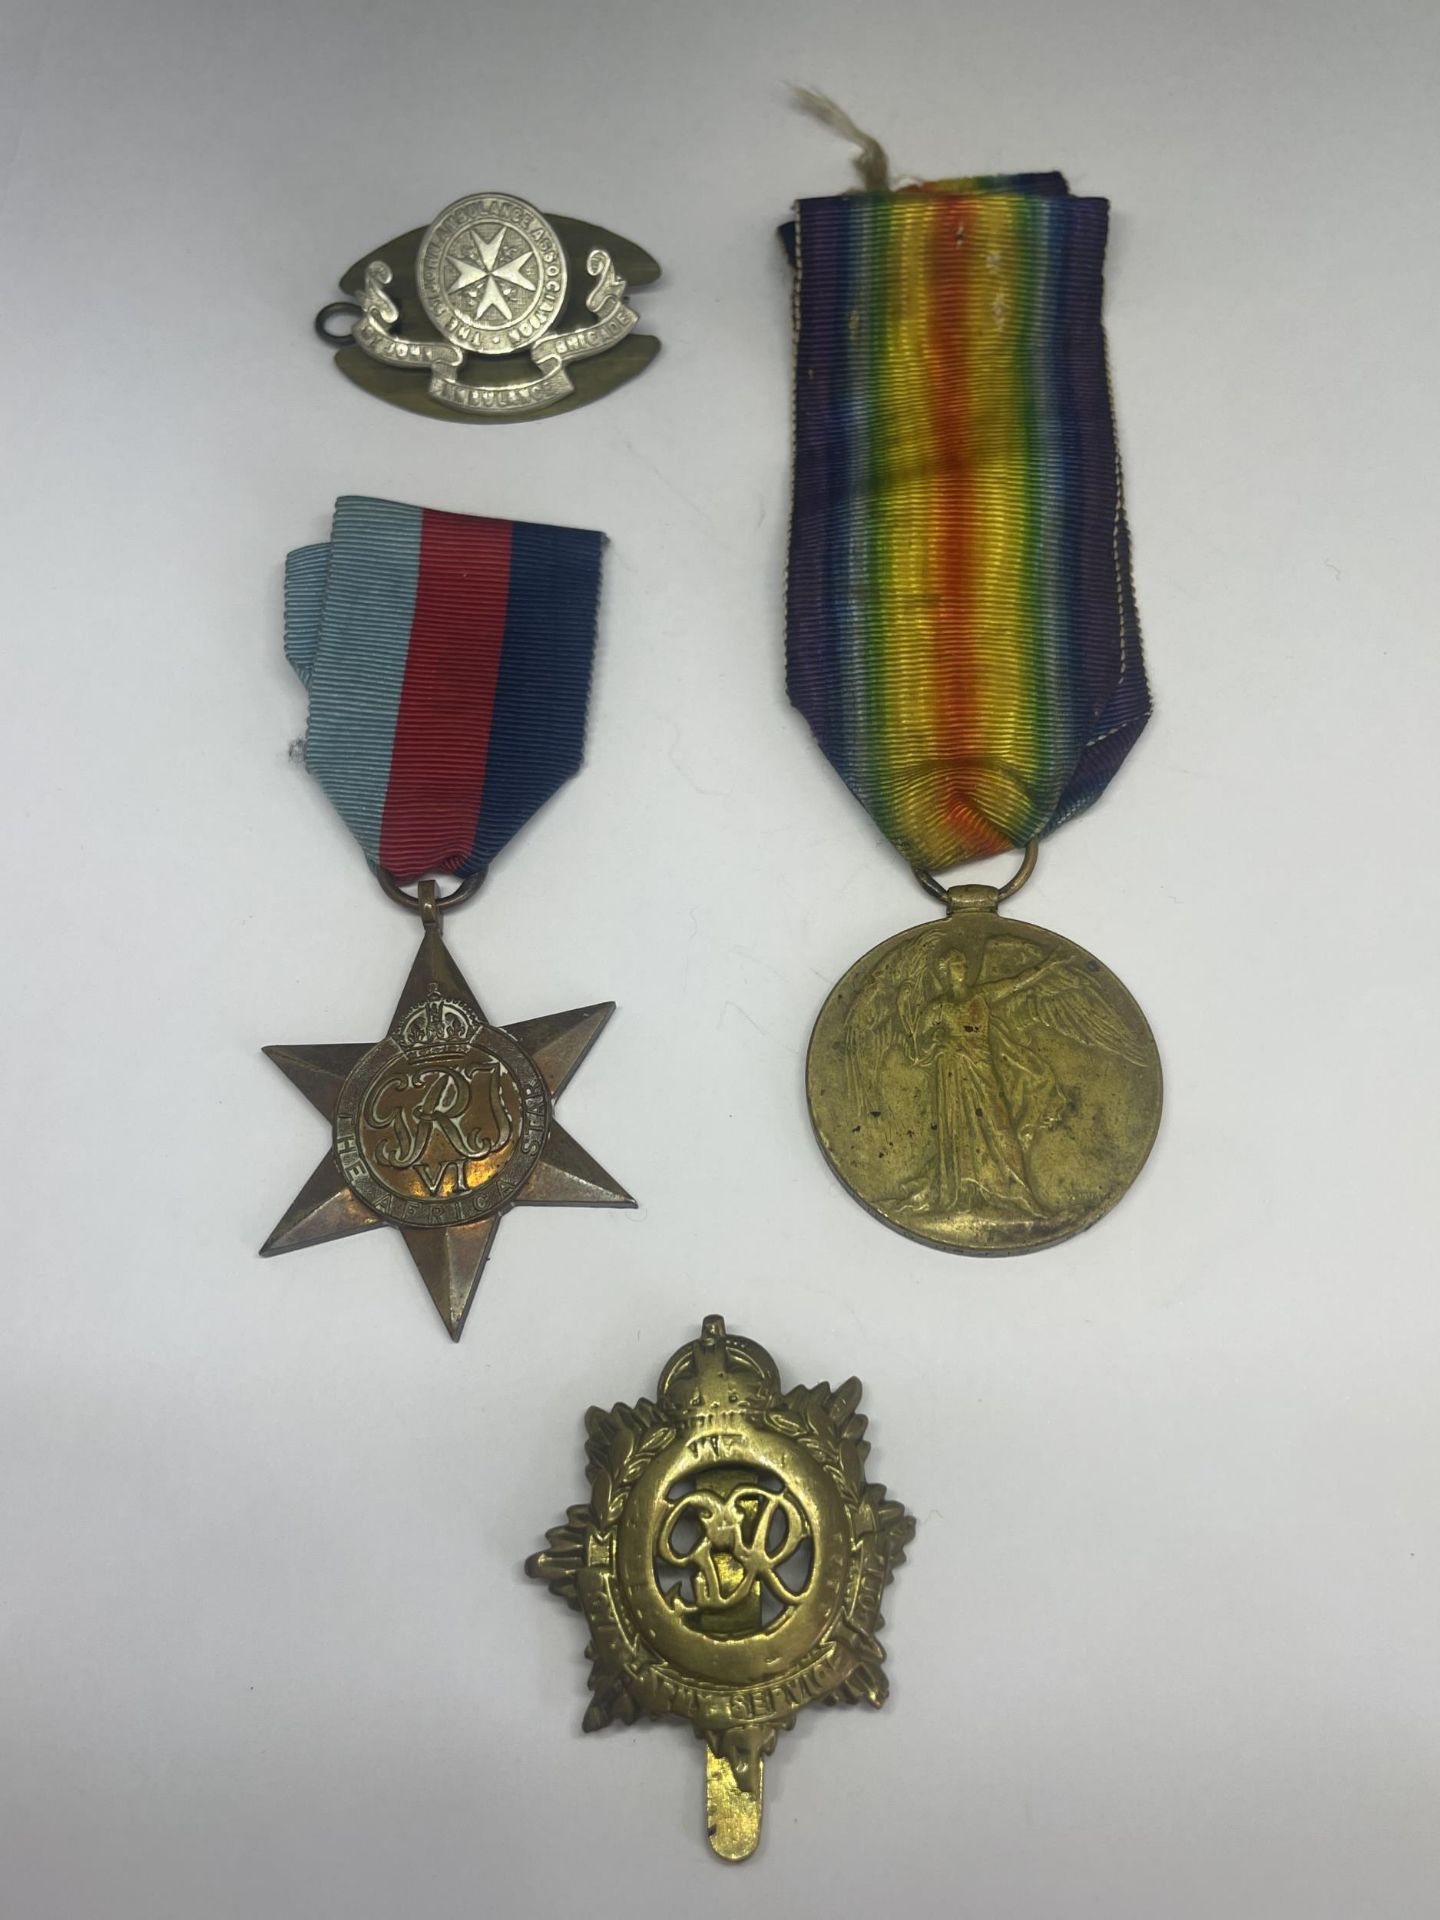 FOUR MILITARY MEDALS AND BADGES